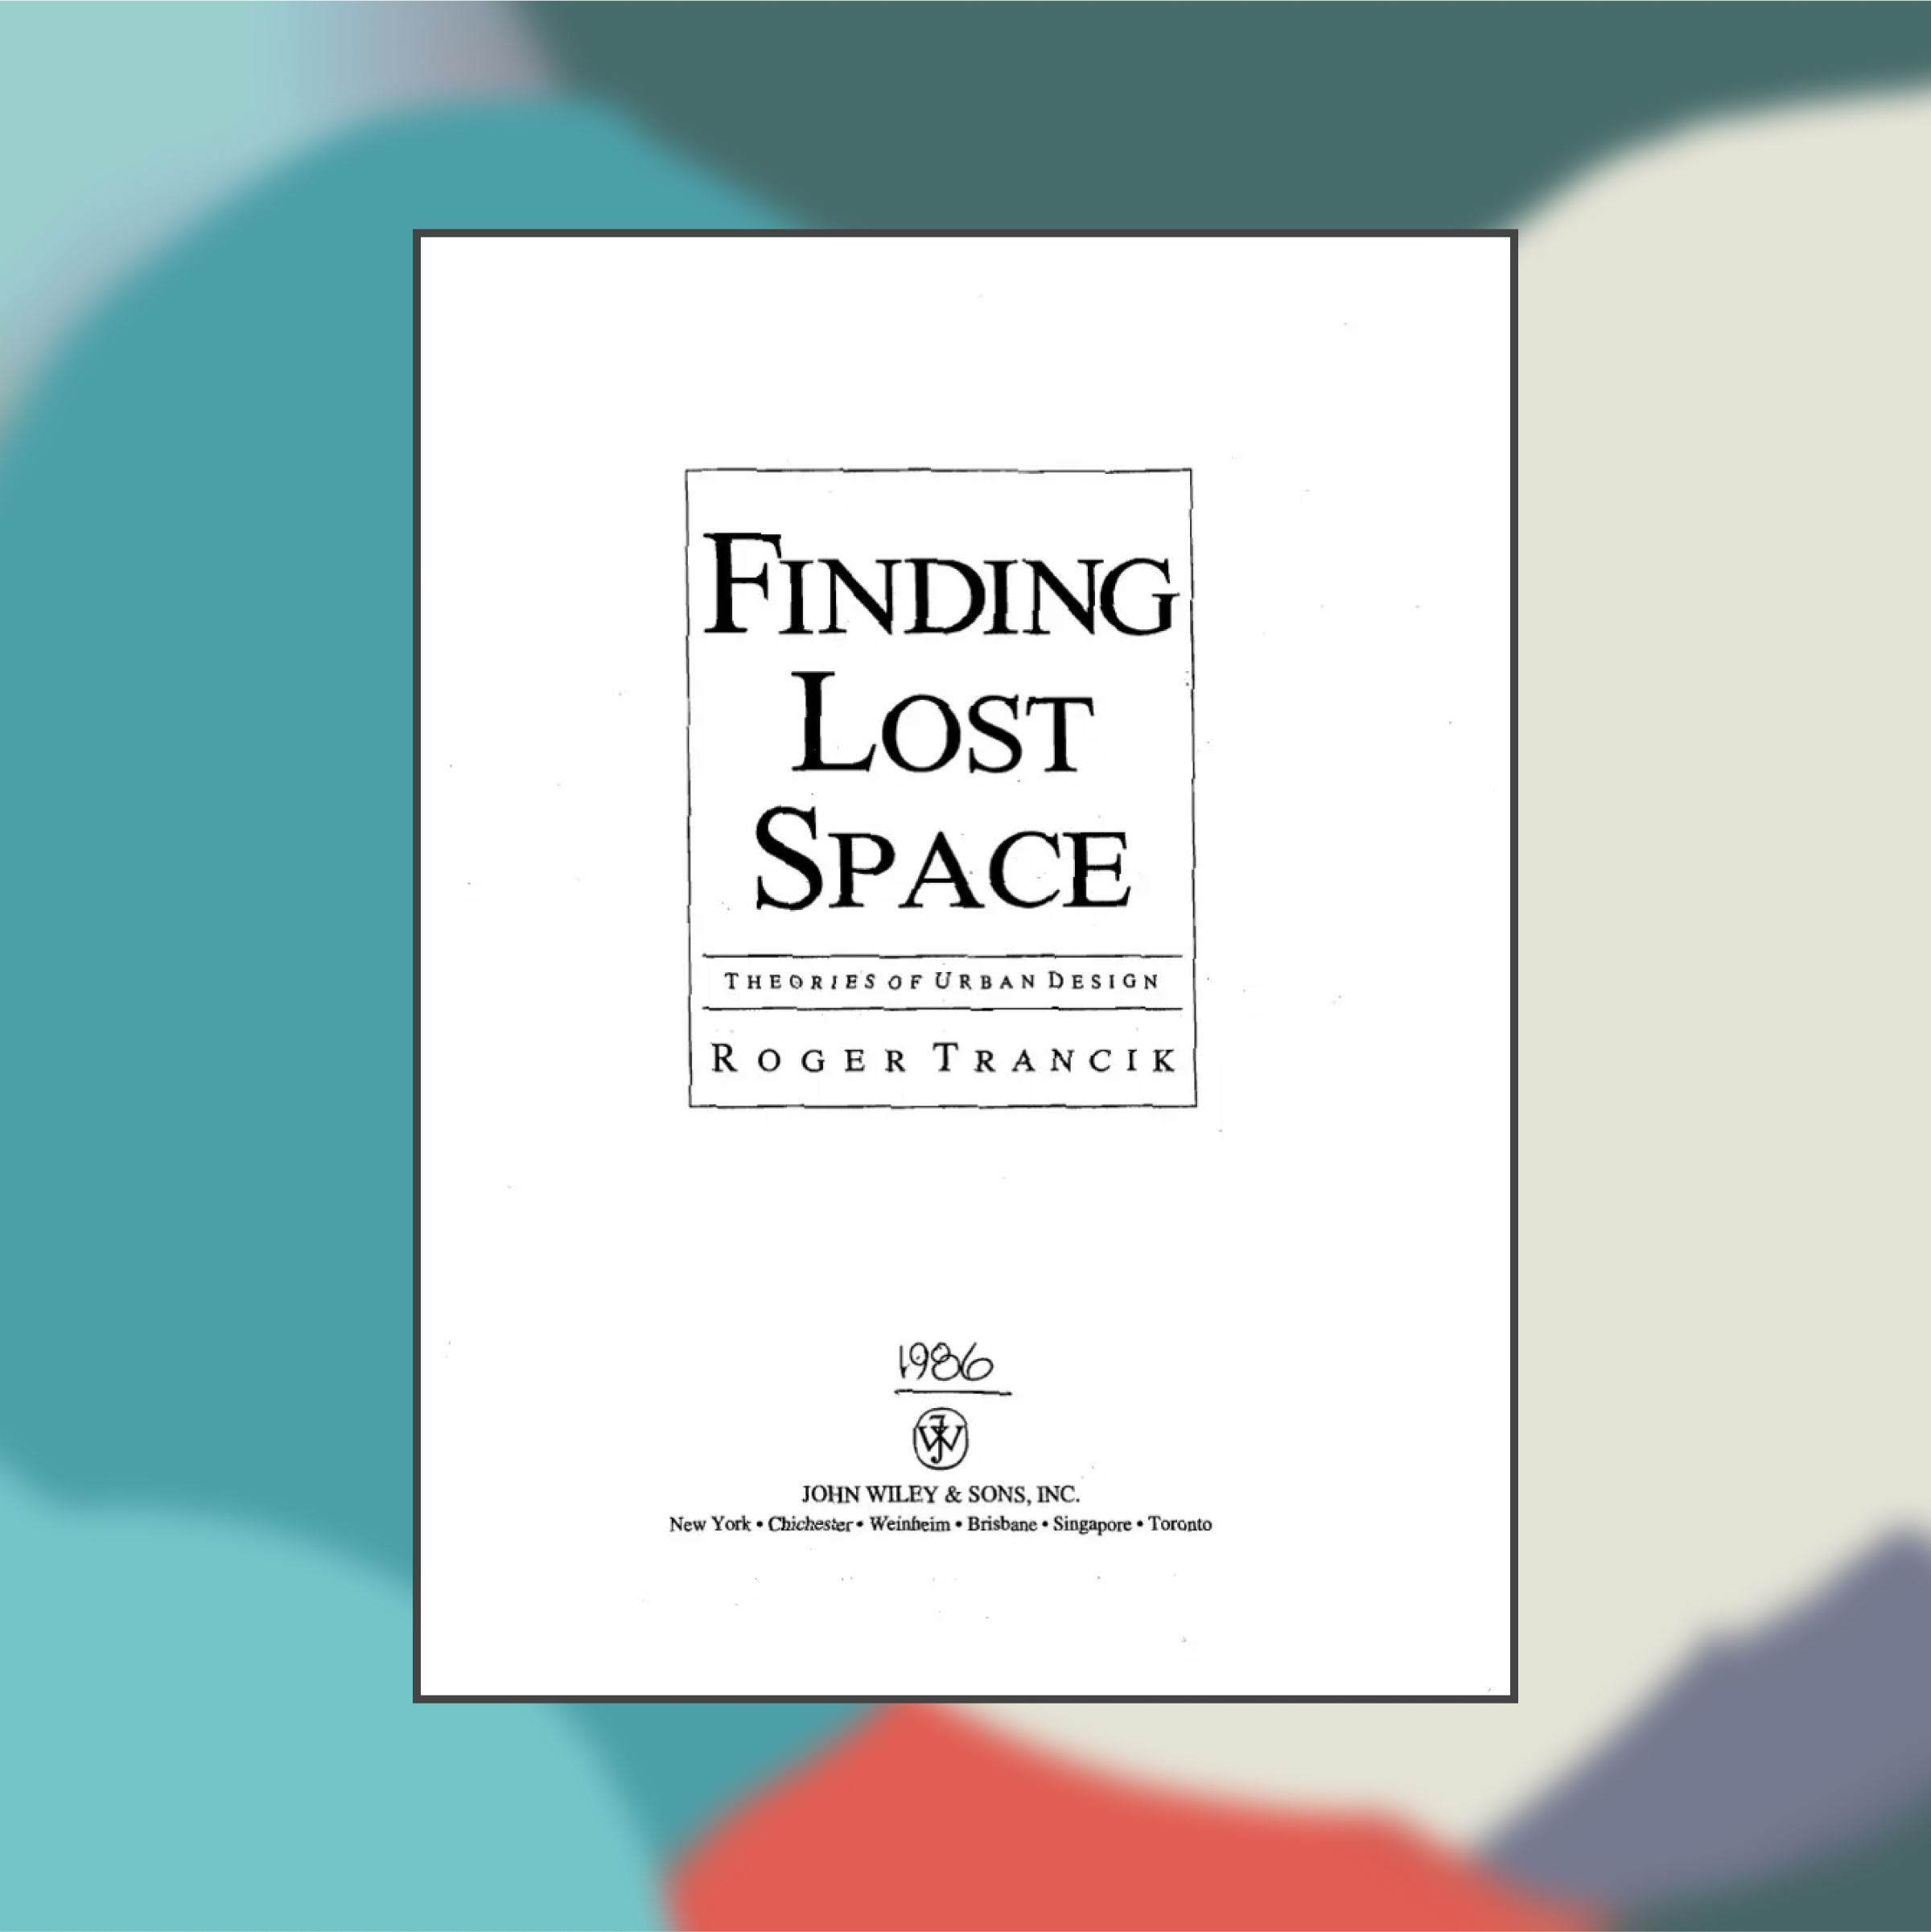 Book cover of Finding Lost Space against a painted background